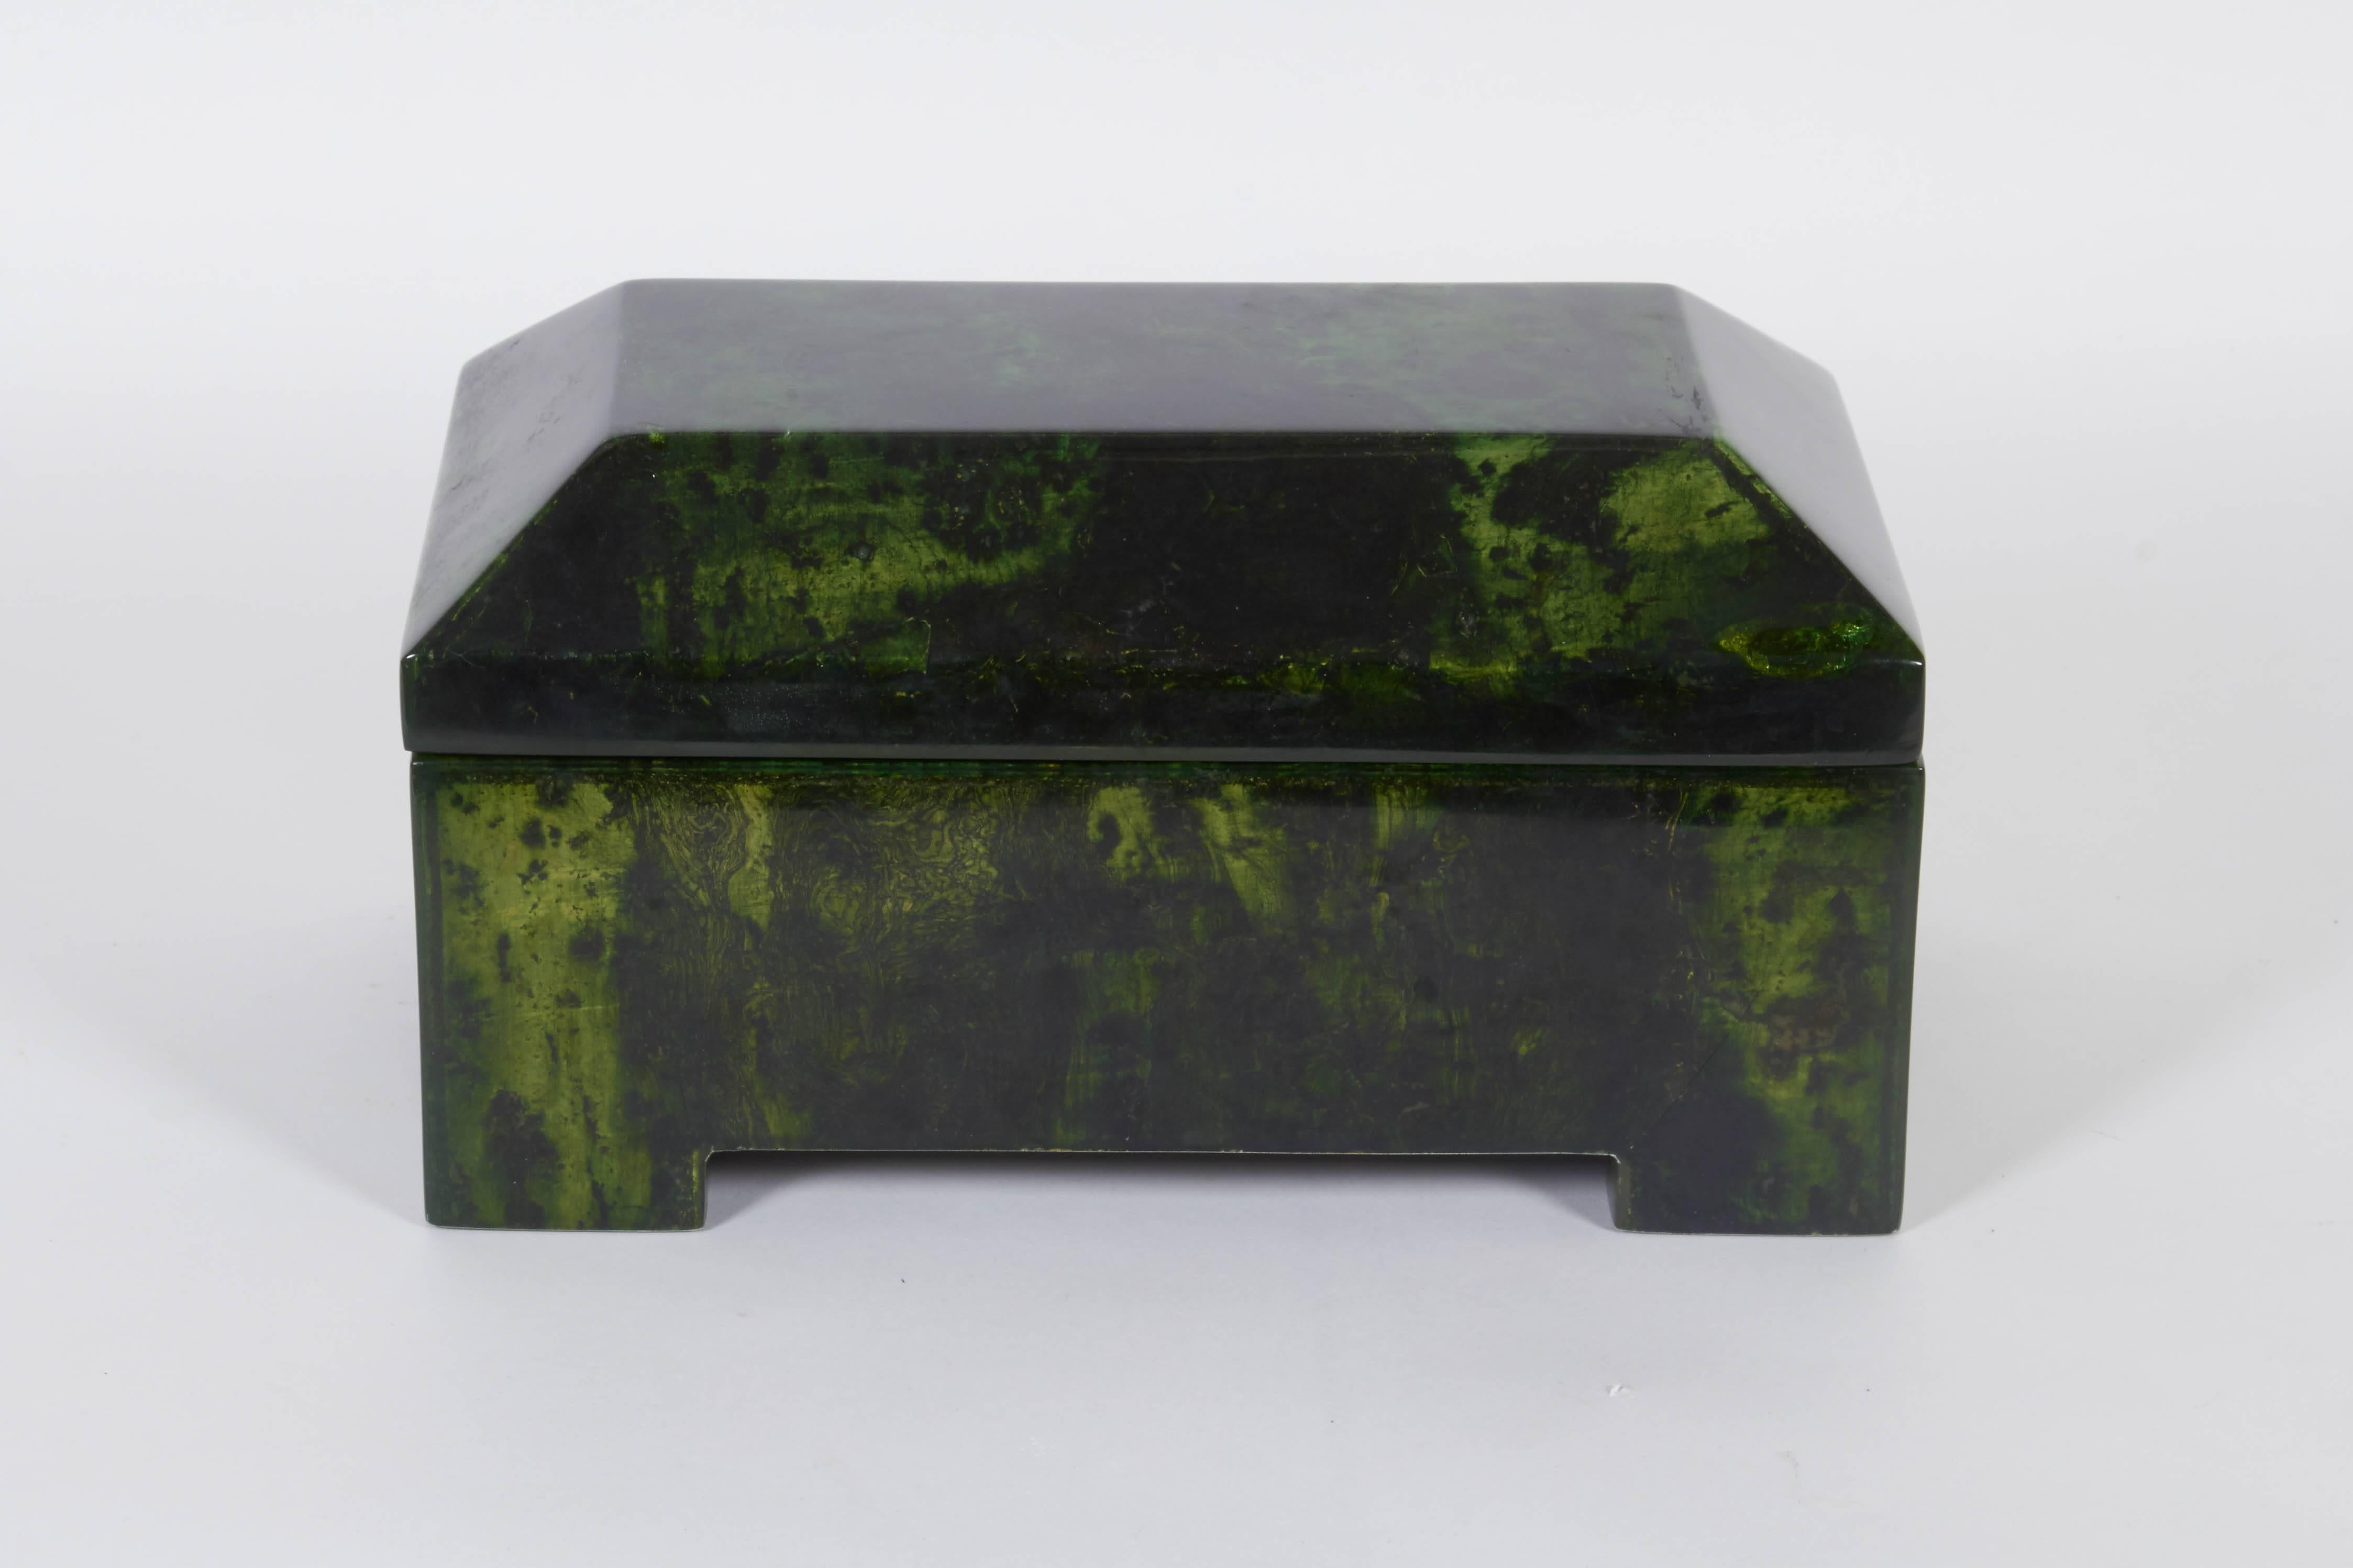 A modern deep green decorative box designed by Enrique Garcel, produced in Colombia, circa 1980s, heavily lacquered with hinged top and brass hardware. Markings include maker's label to the underside. Very good condition, minuscule wear consistent